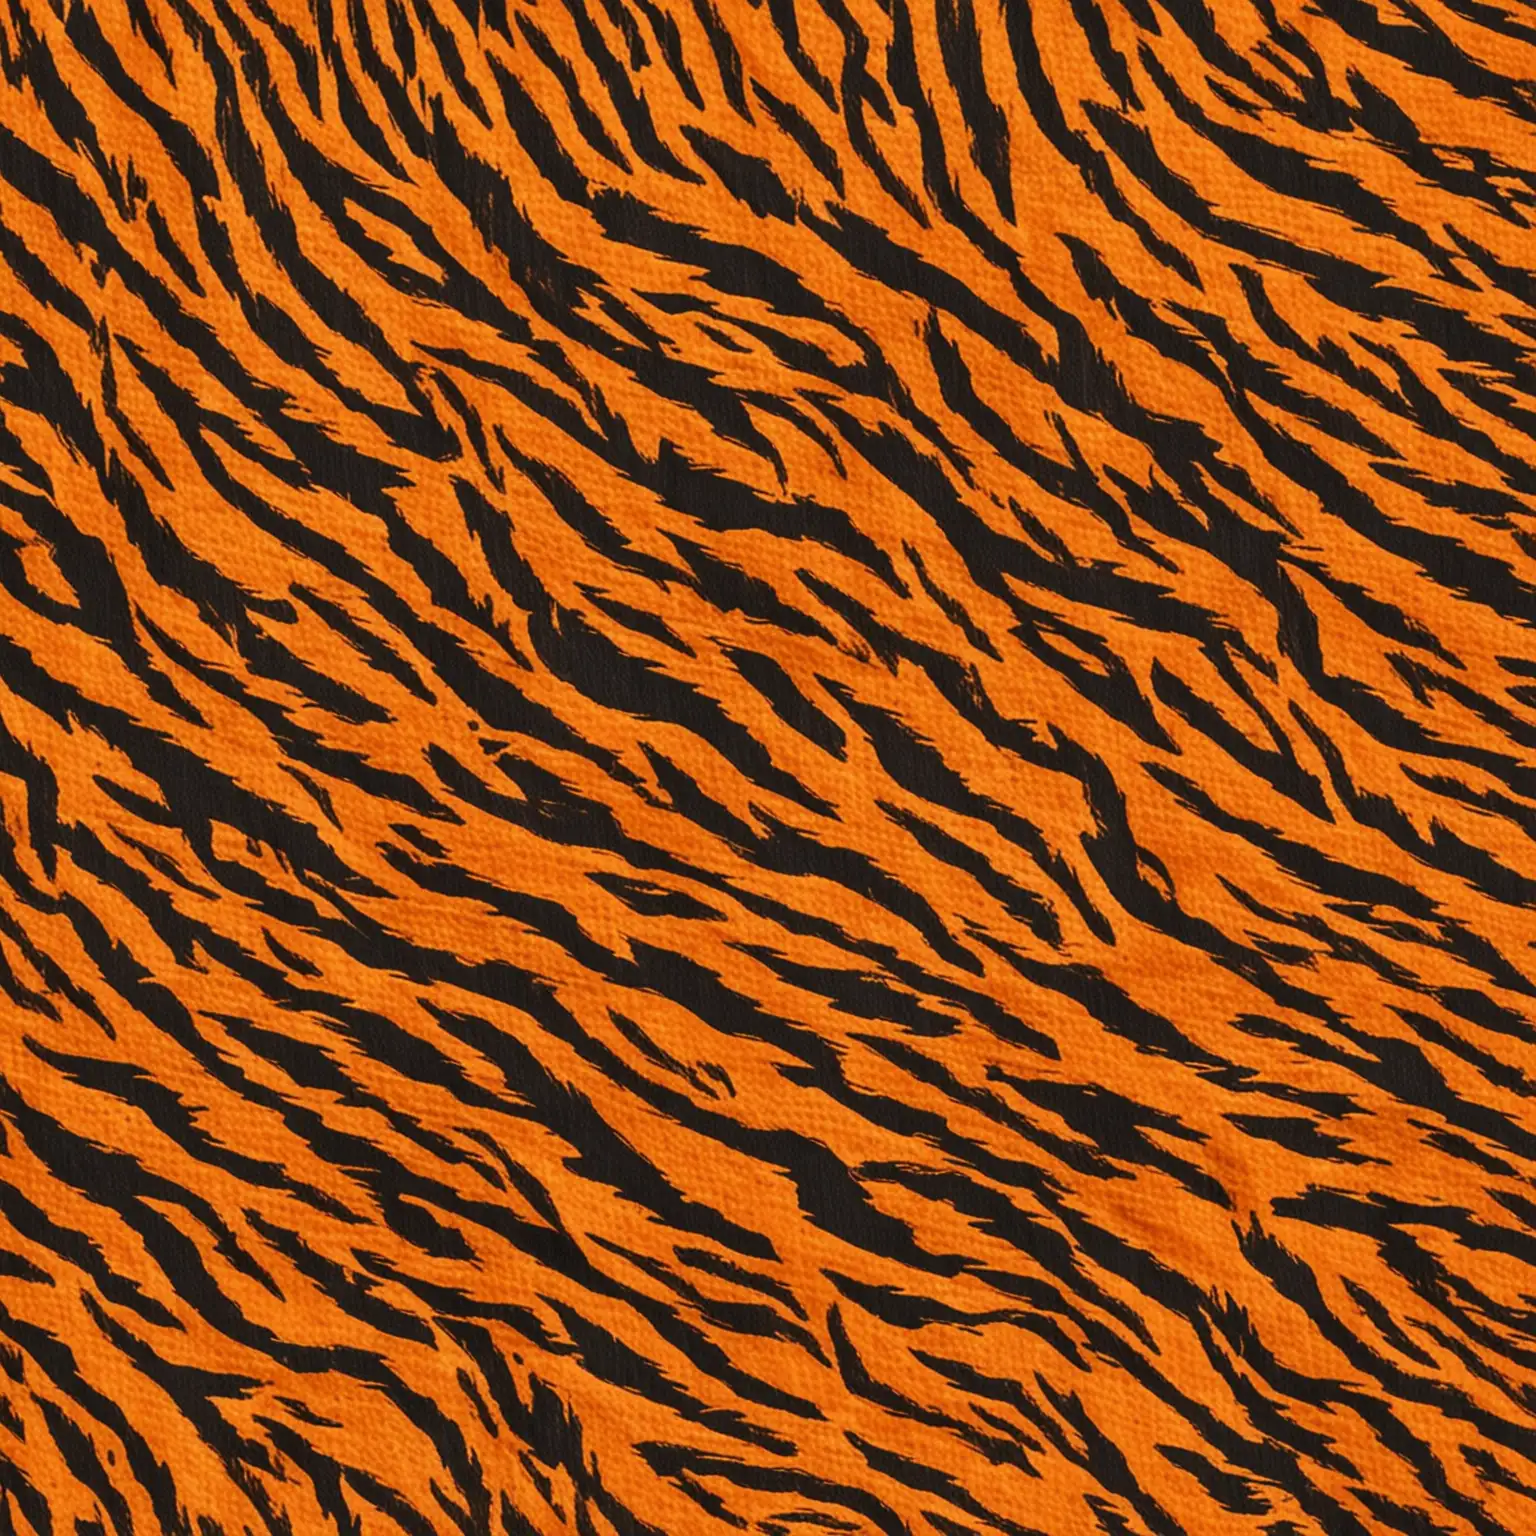 generate a repetetive patter of orange tiger stripes to print on fabric